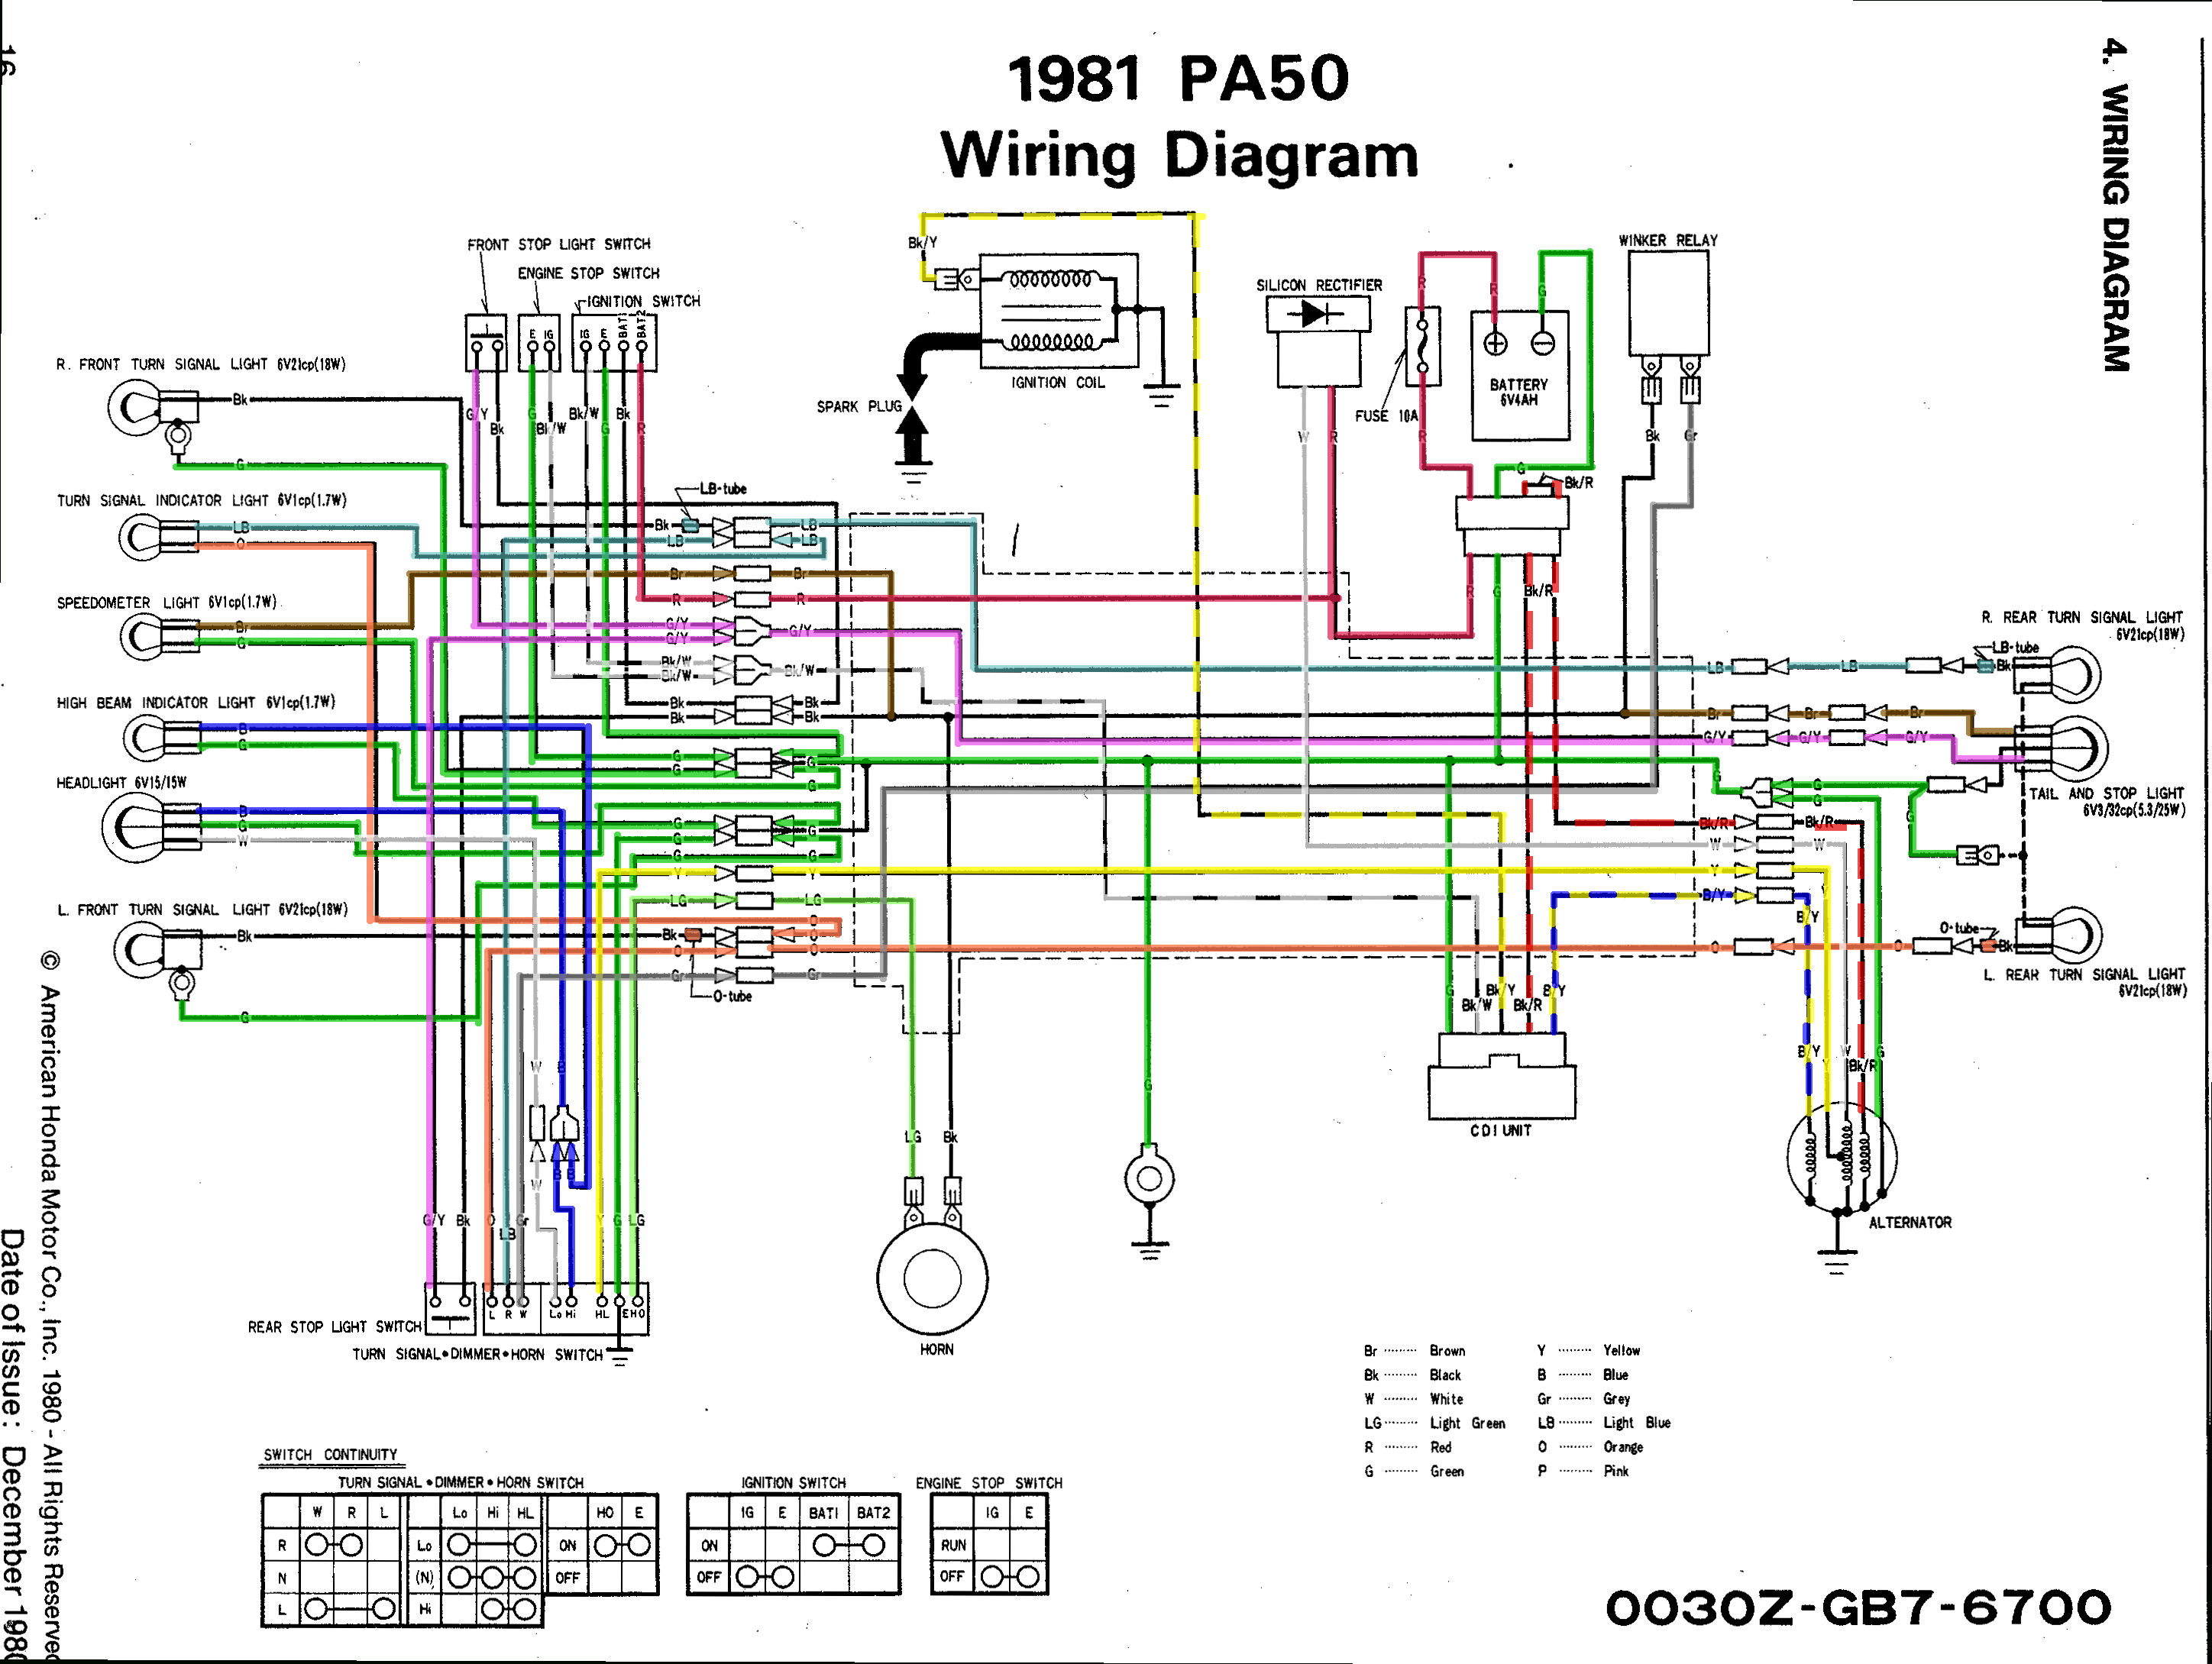 Moped Cdi Box Wire Diagram | Best Wiring Library - 6 Pin Cdi Box Wiring Diagram